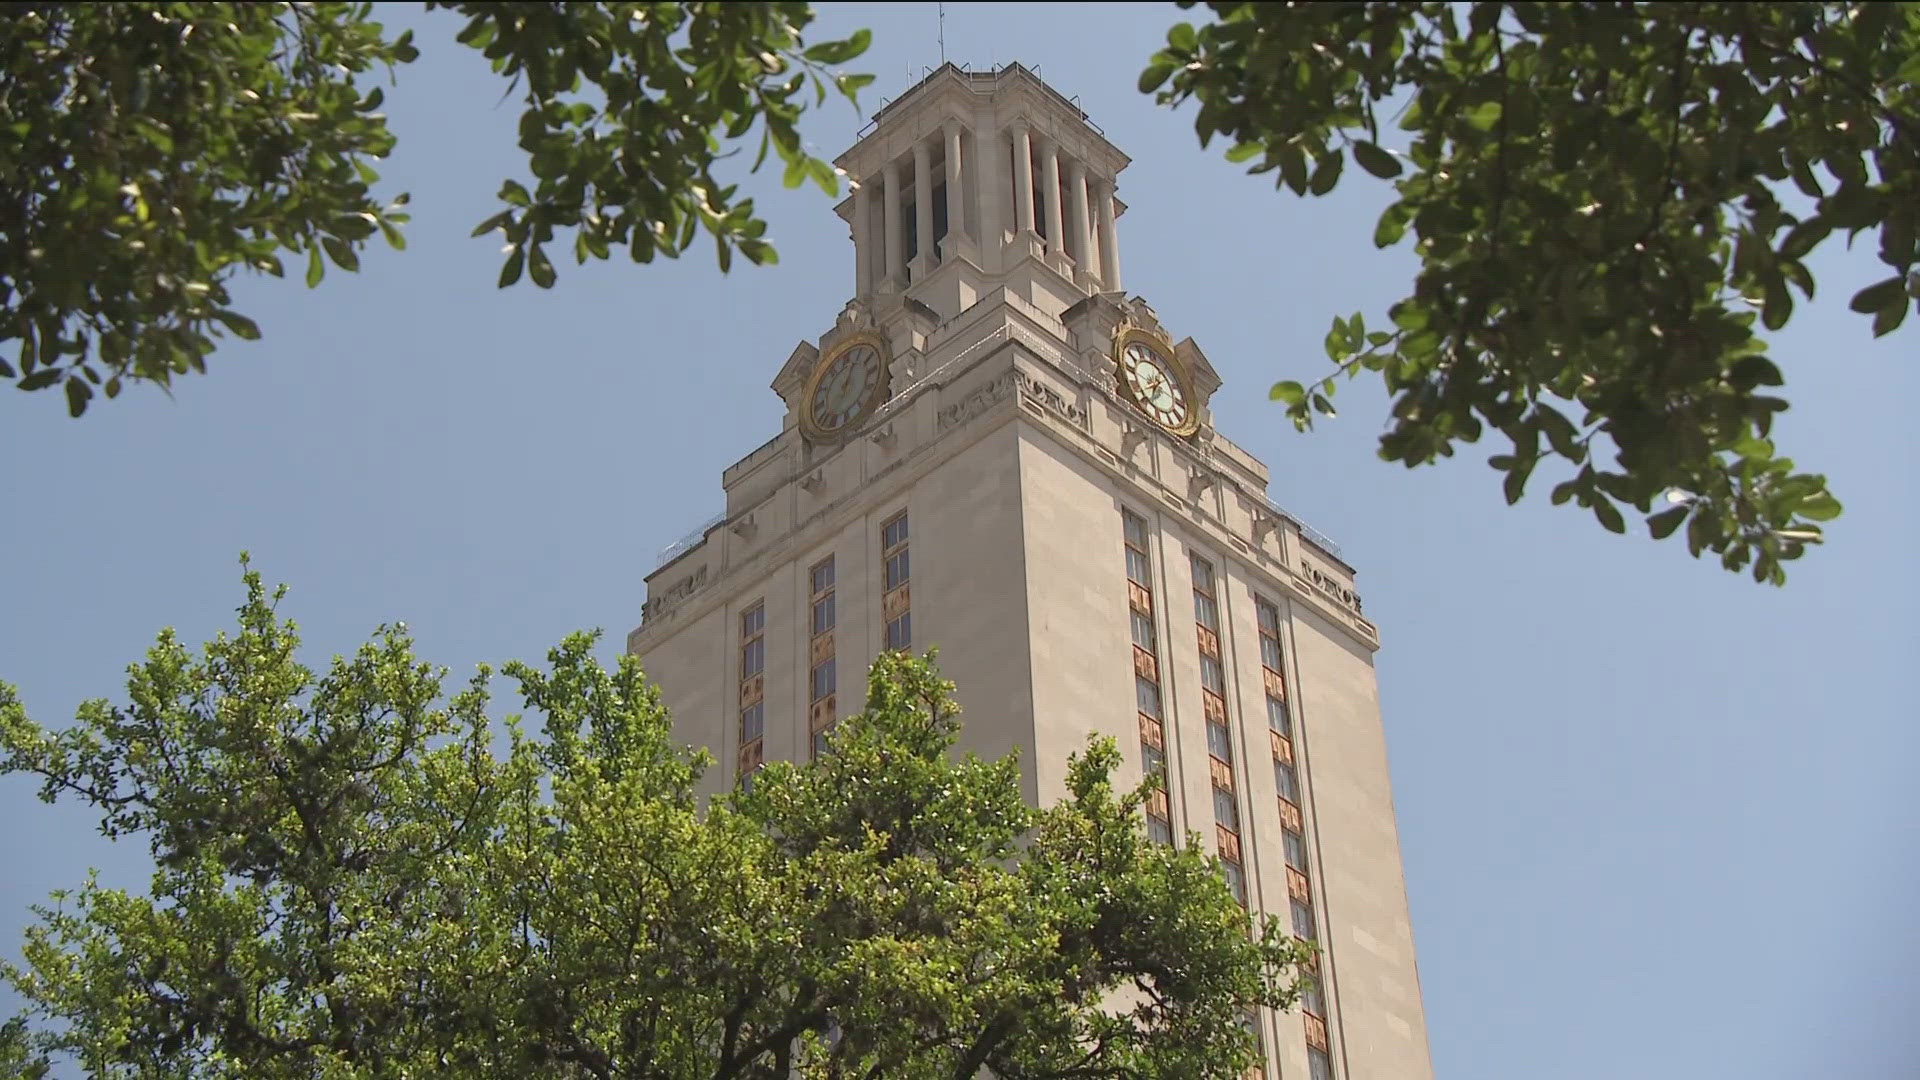 More than 600 University of Texas faculty members are speaking out against President Jay Hartzell, saying he has "violated" their trust.